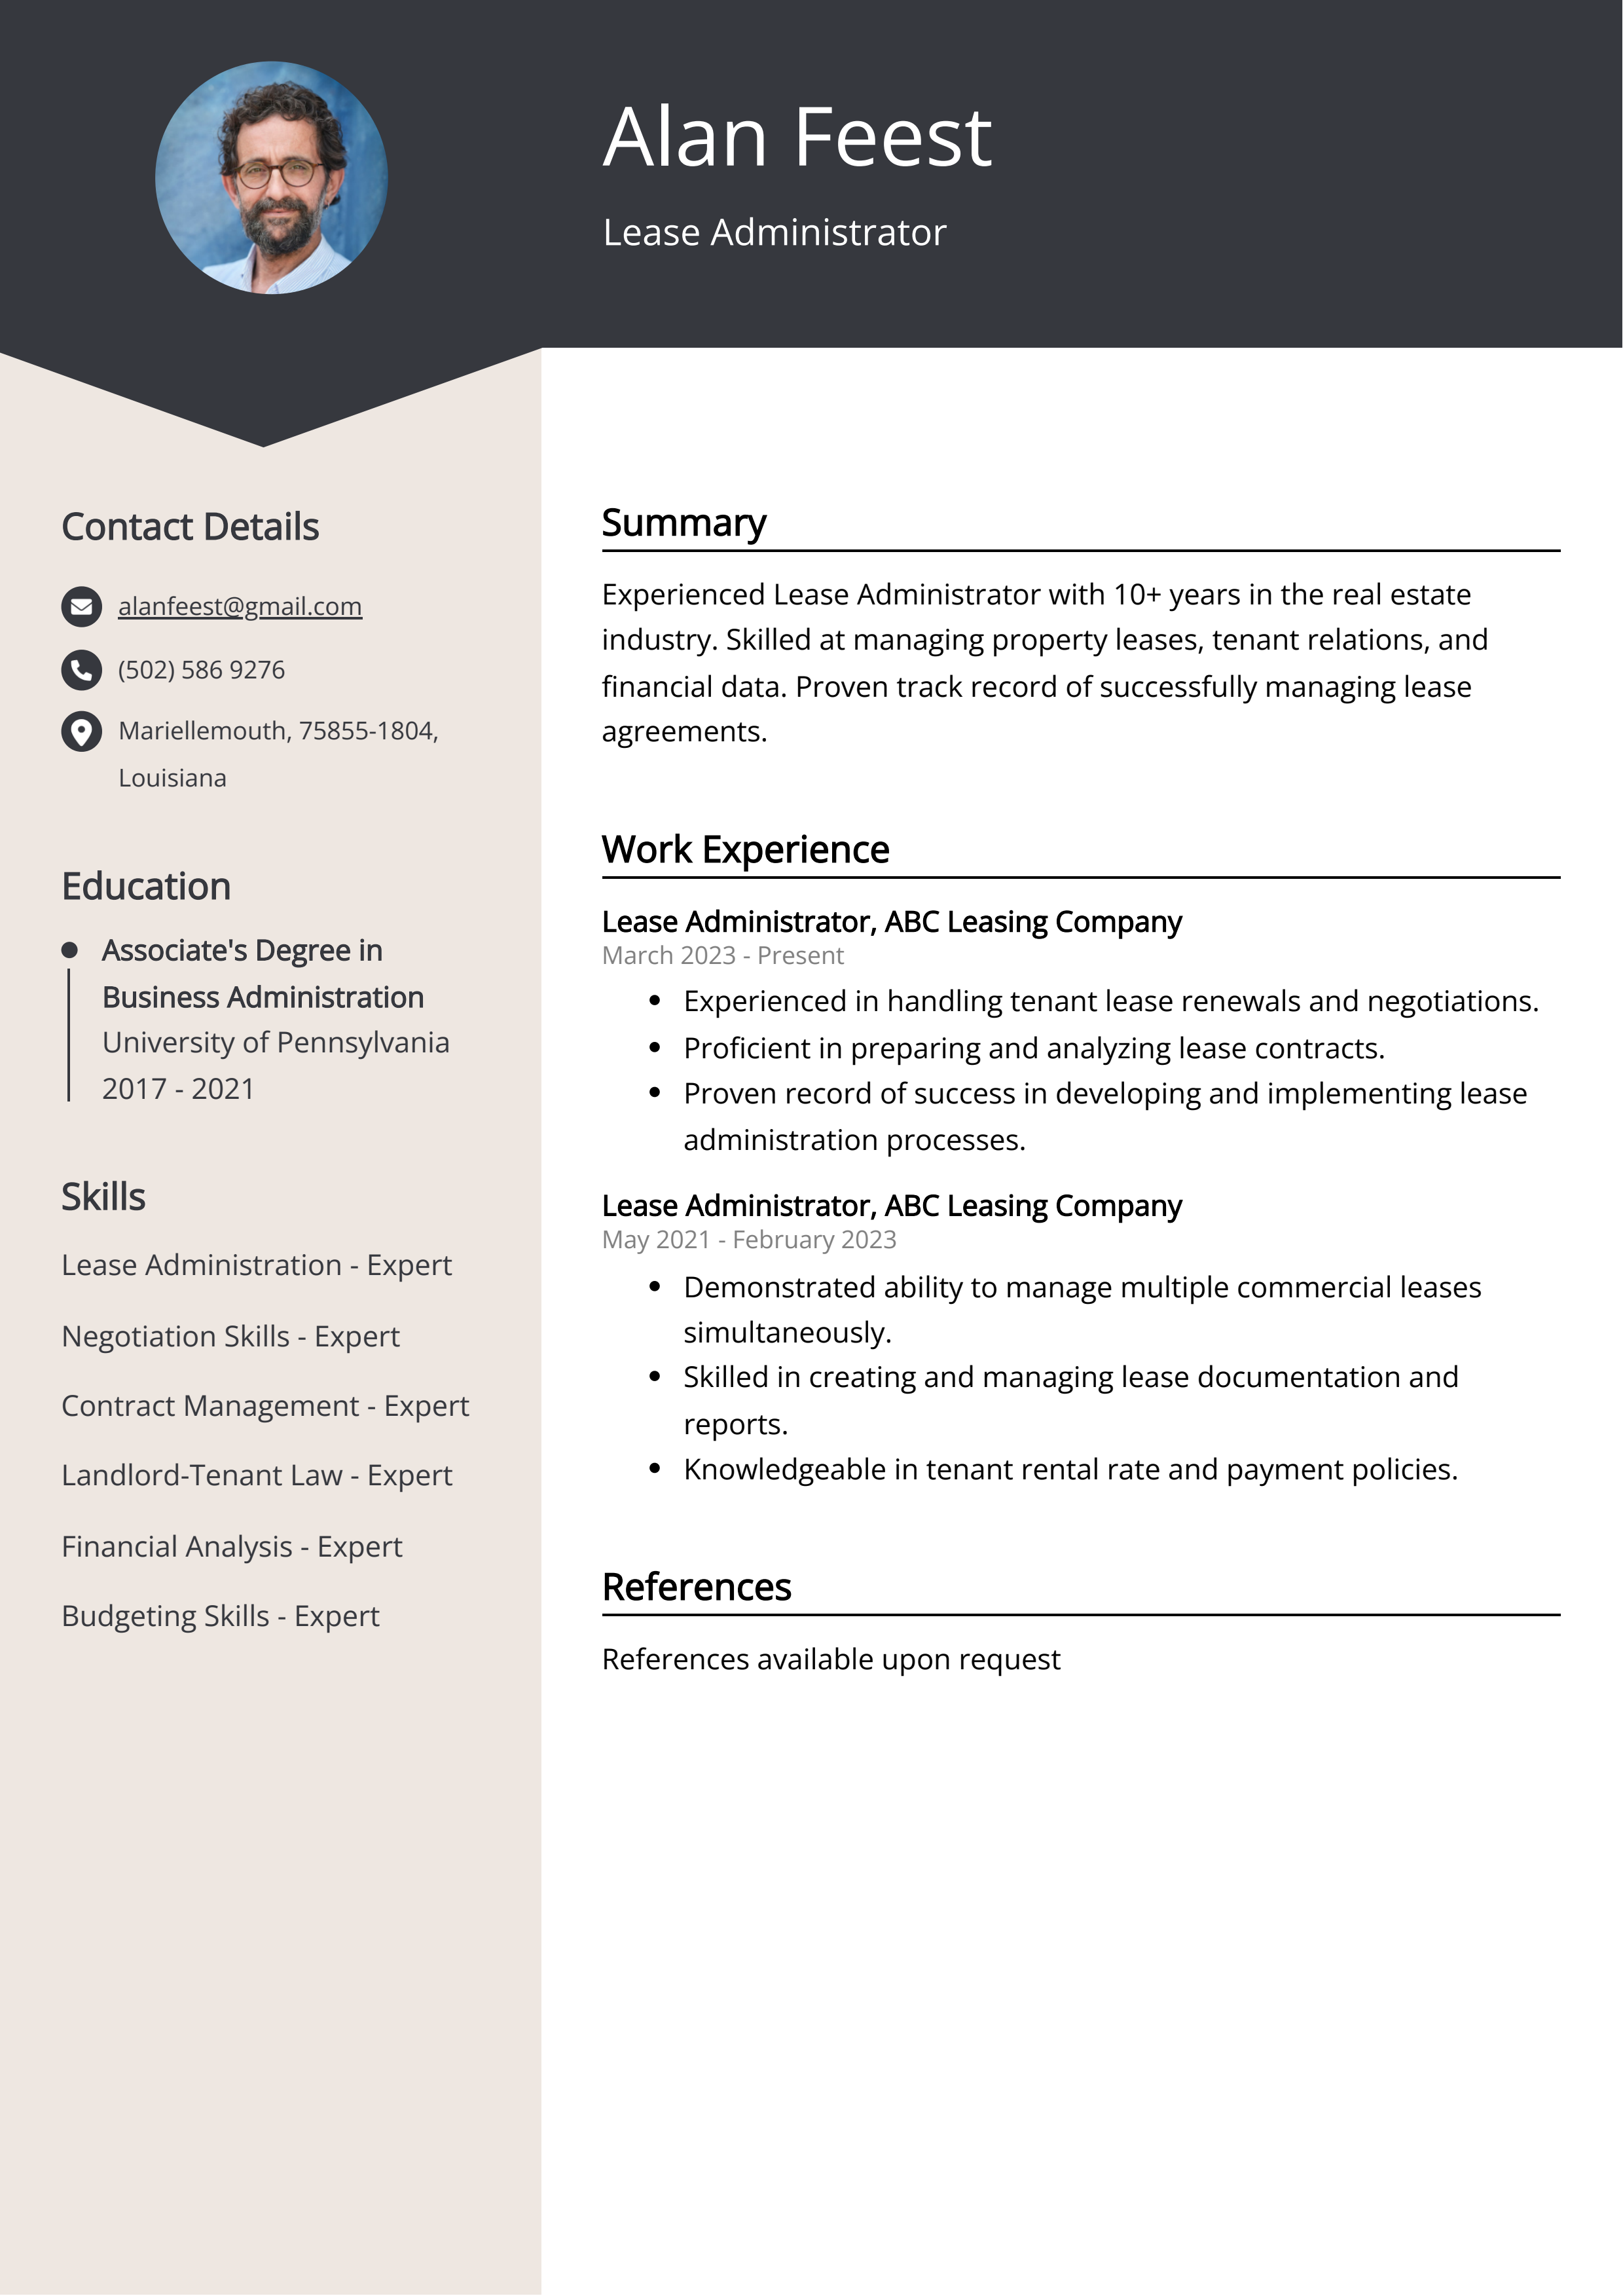 Lease Administrator CV Example